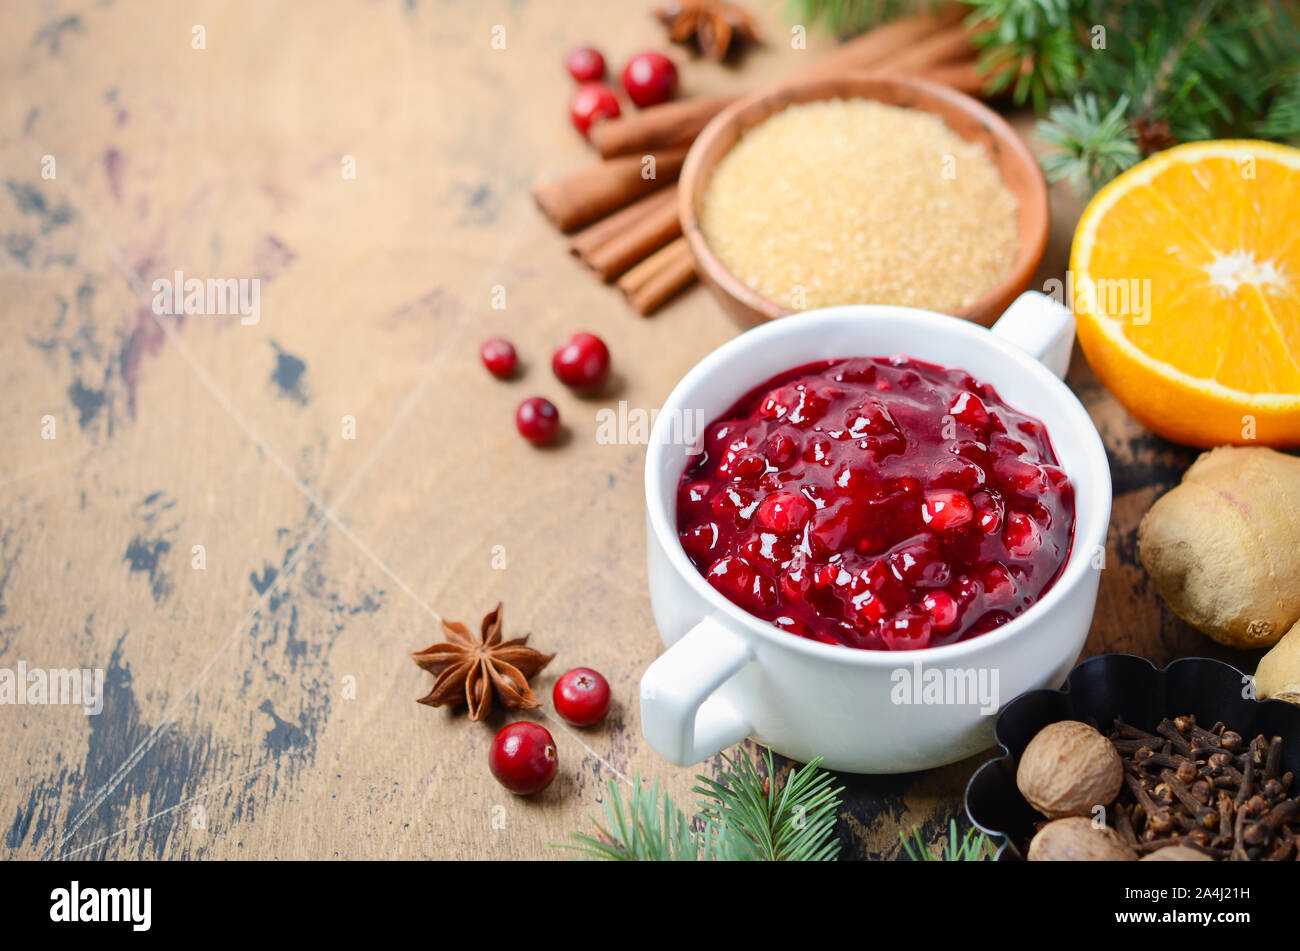 Cranberry sauce with ingredients on a wooden background. Stock Photo